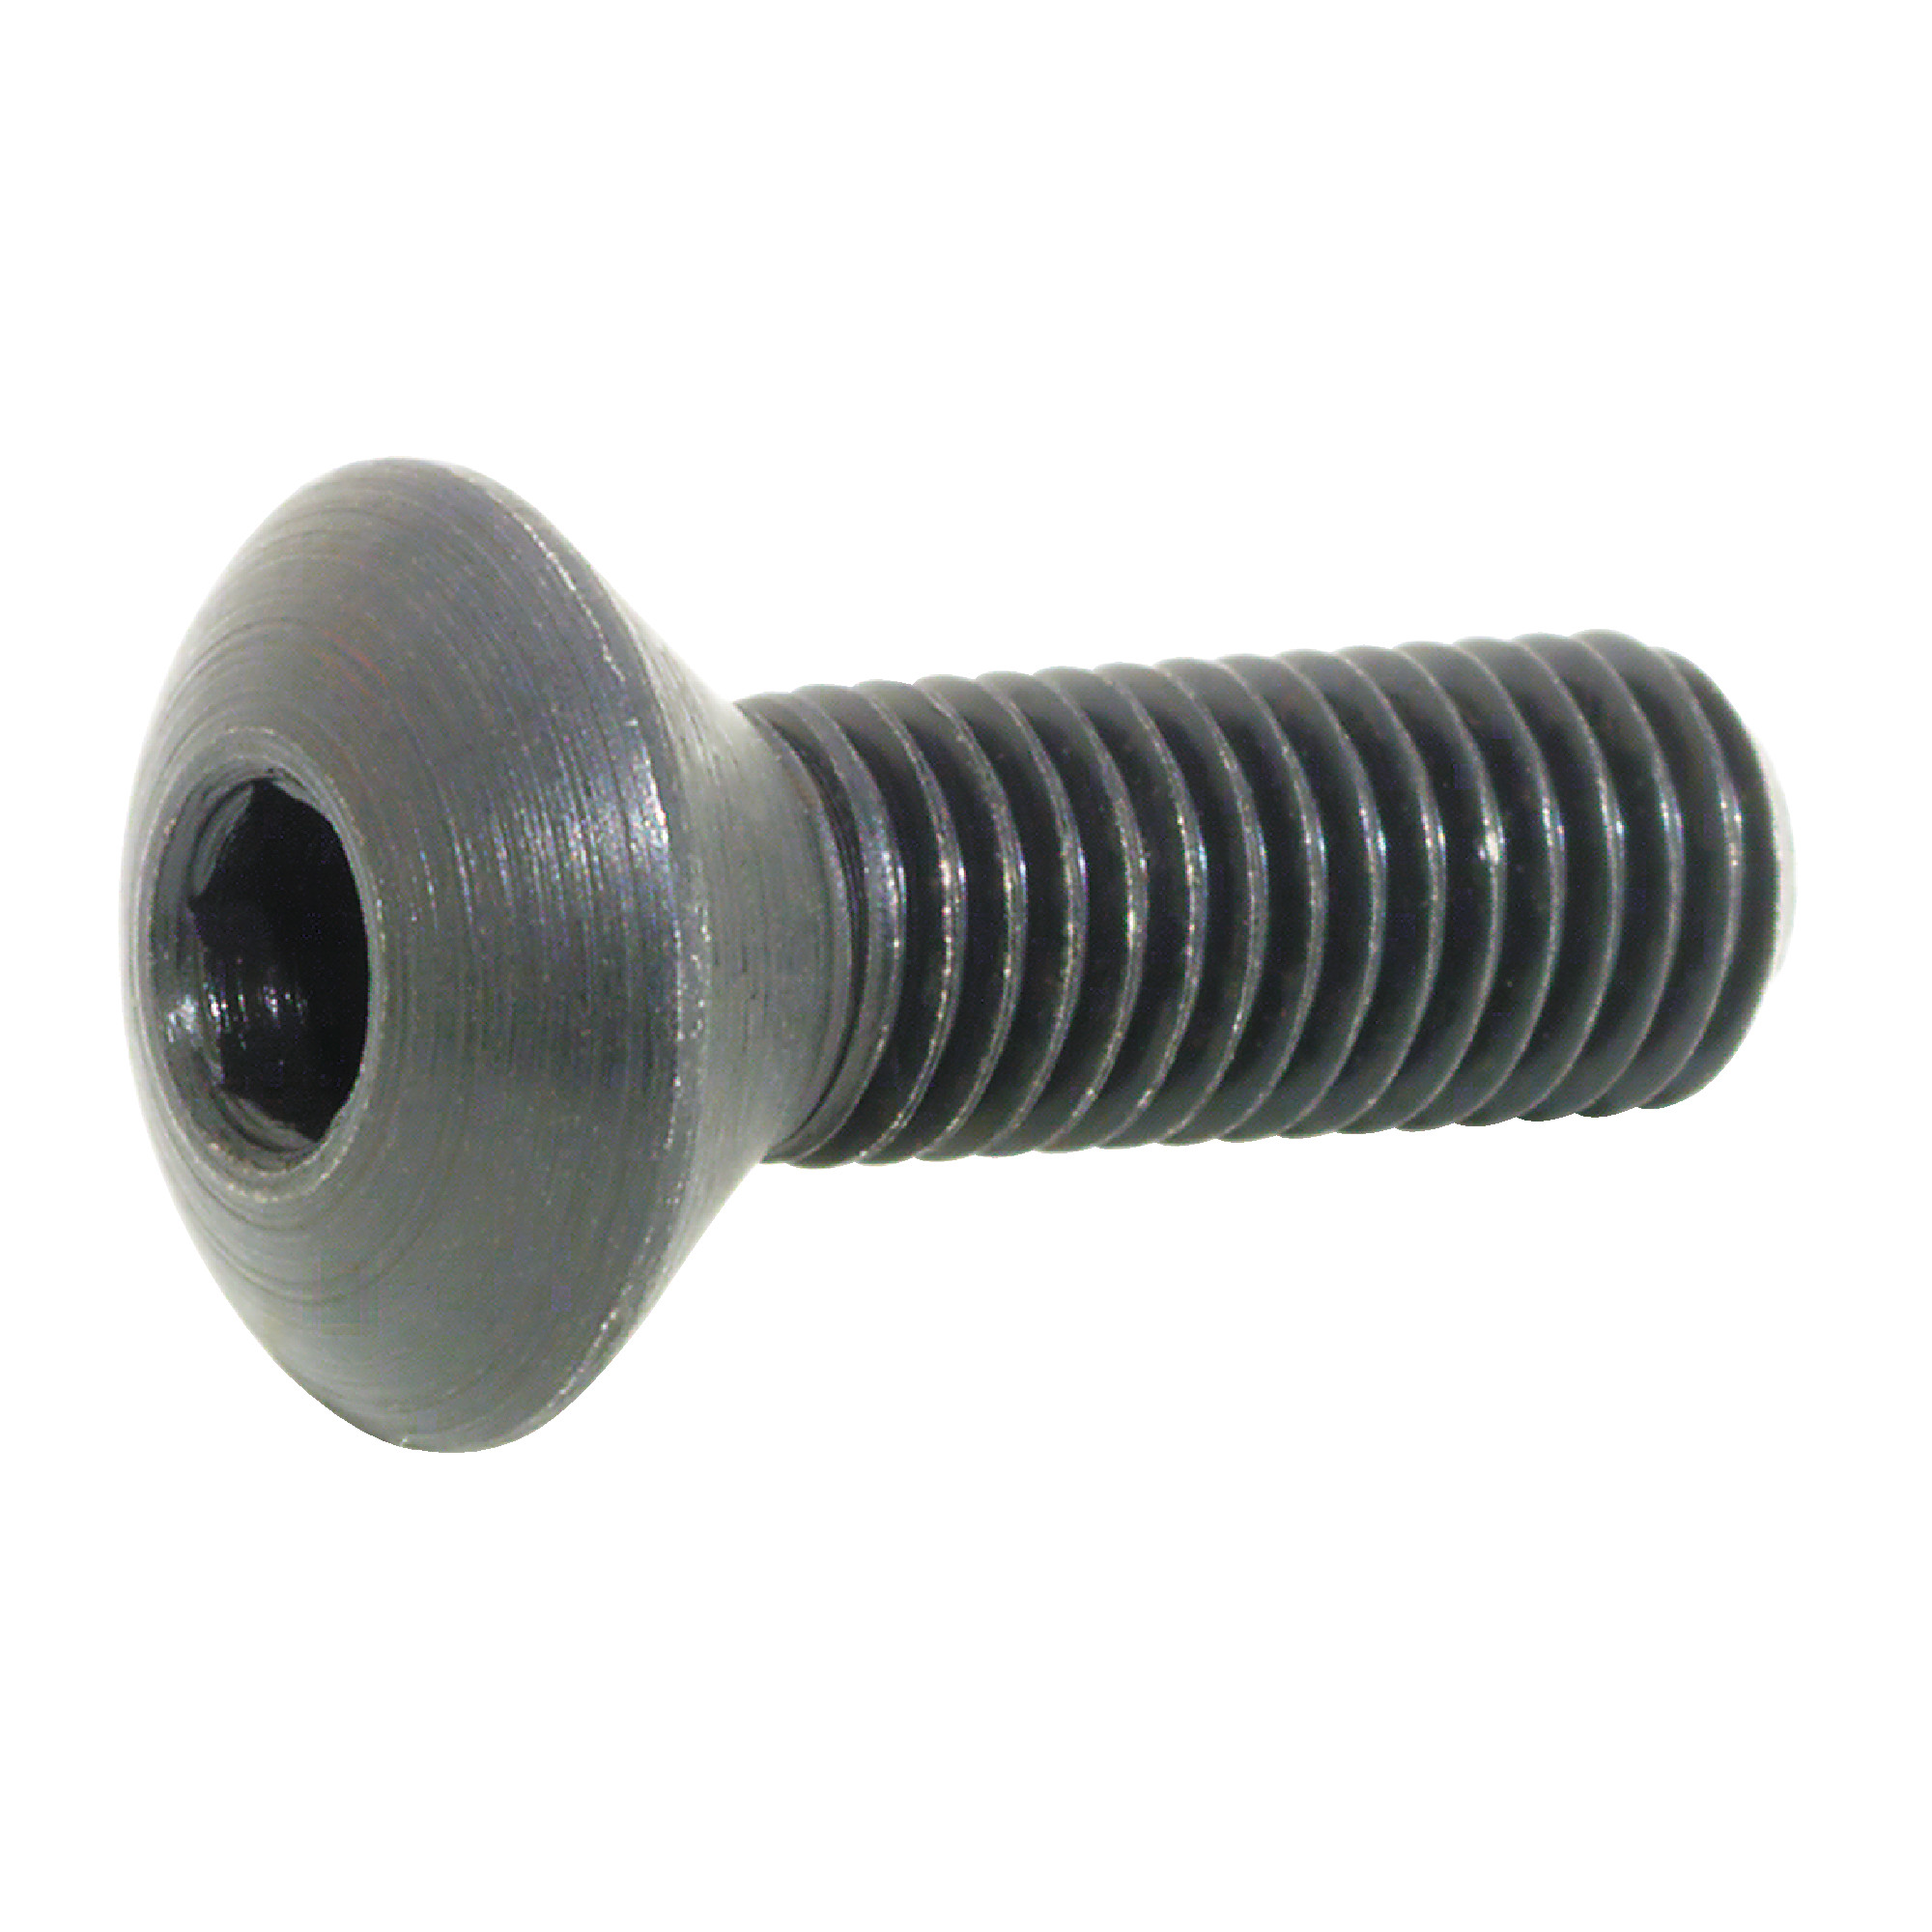 ARNO - AS0022 Clamp Screw